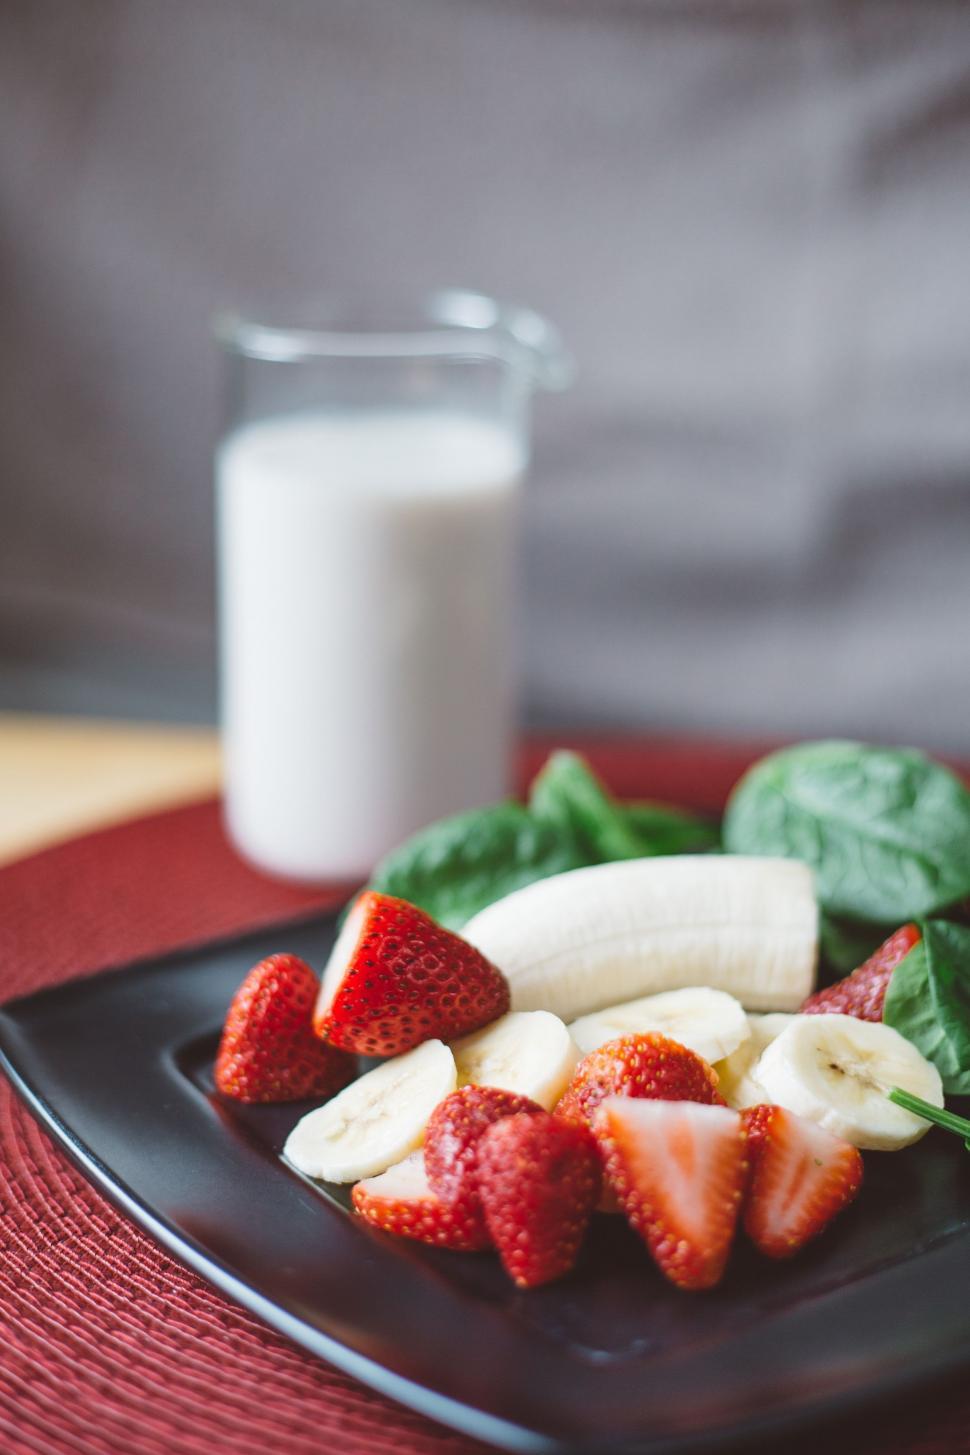 Free Image of Fresh Fruit Plate With Bananas and Strawberries 